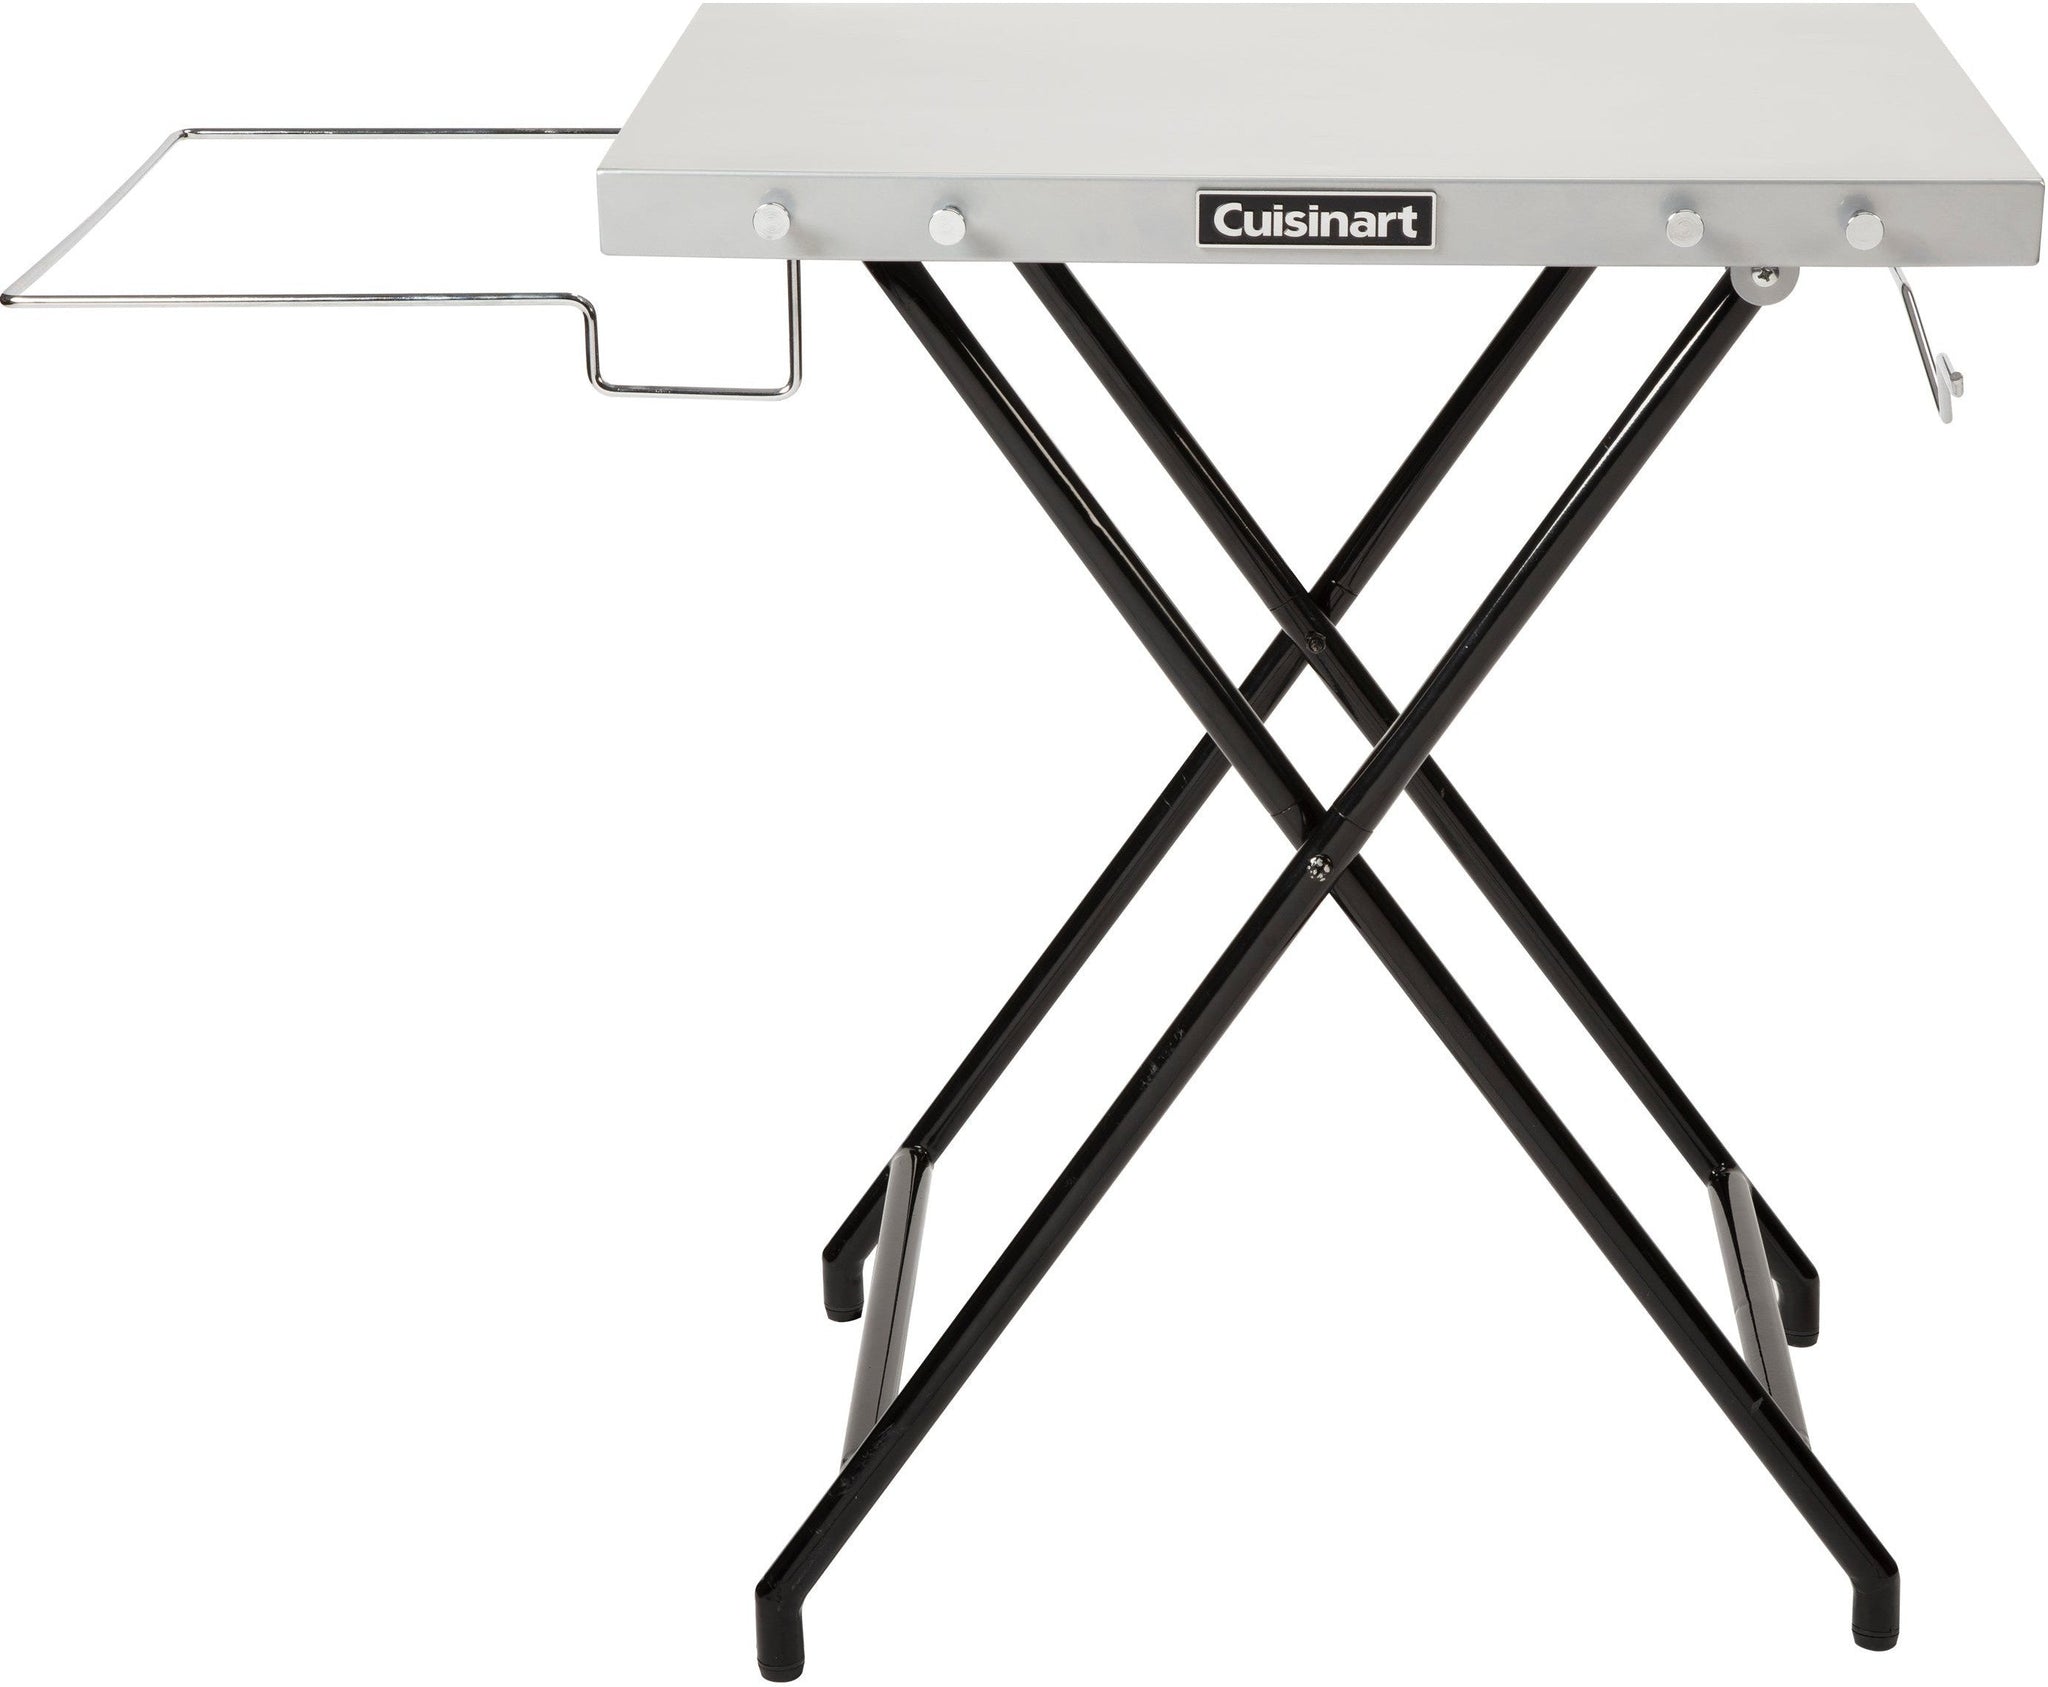 Cuisinart - 24" X 20" Fold 'N Go Prep Table & Grill Stand - CPT-2110-C